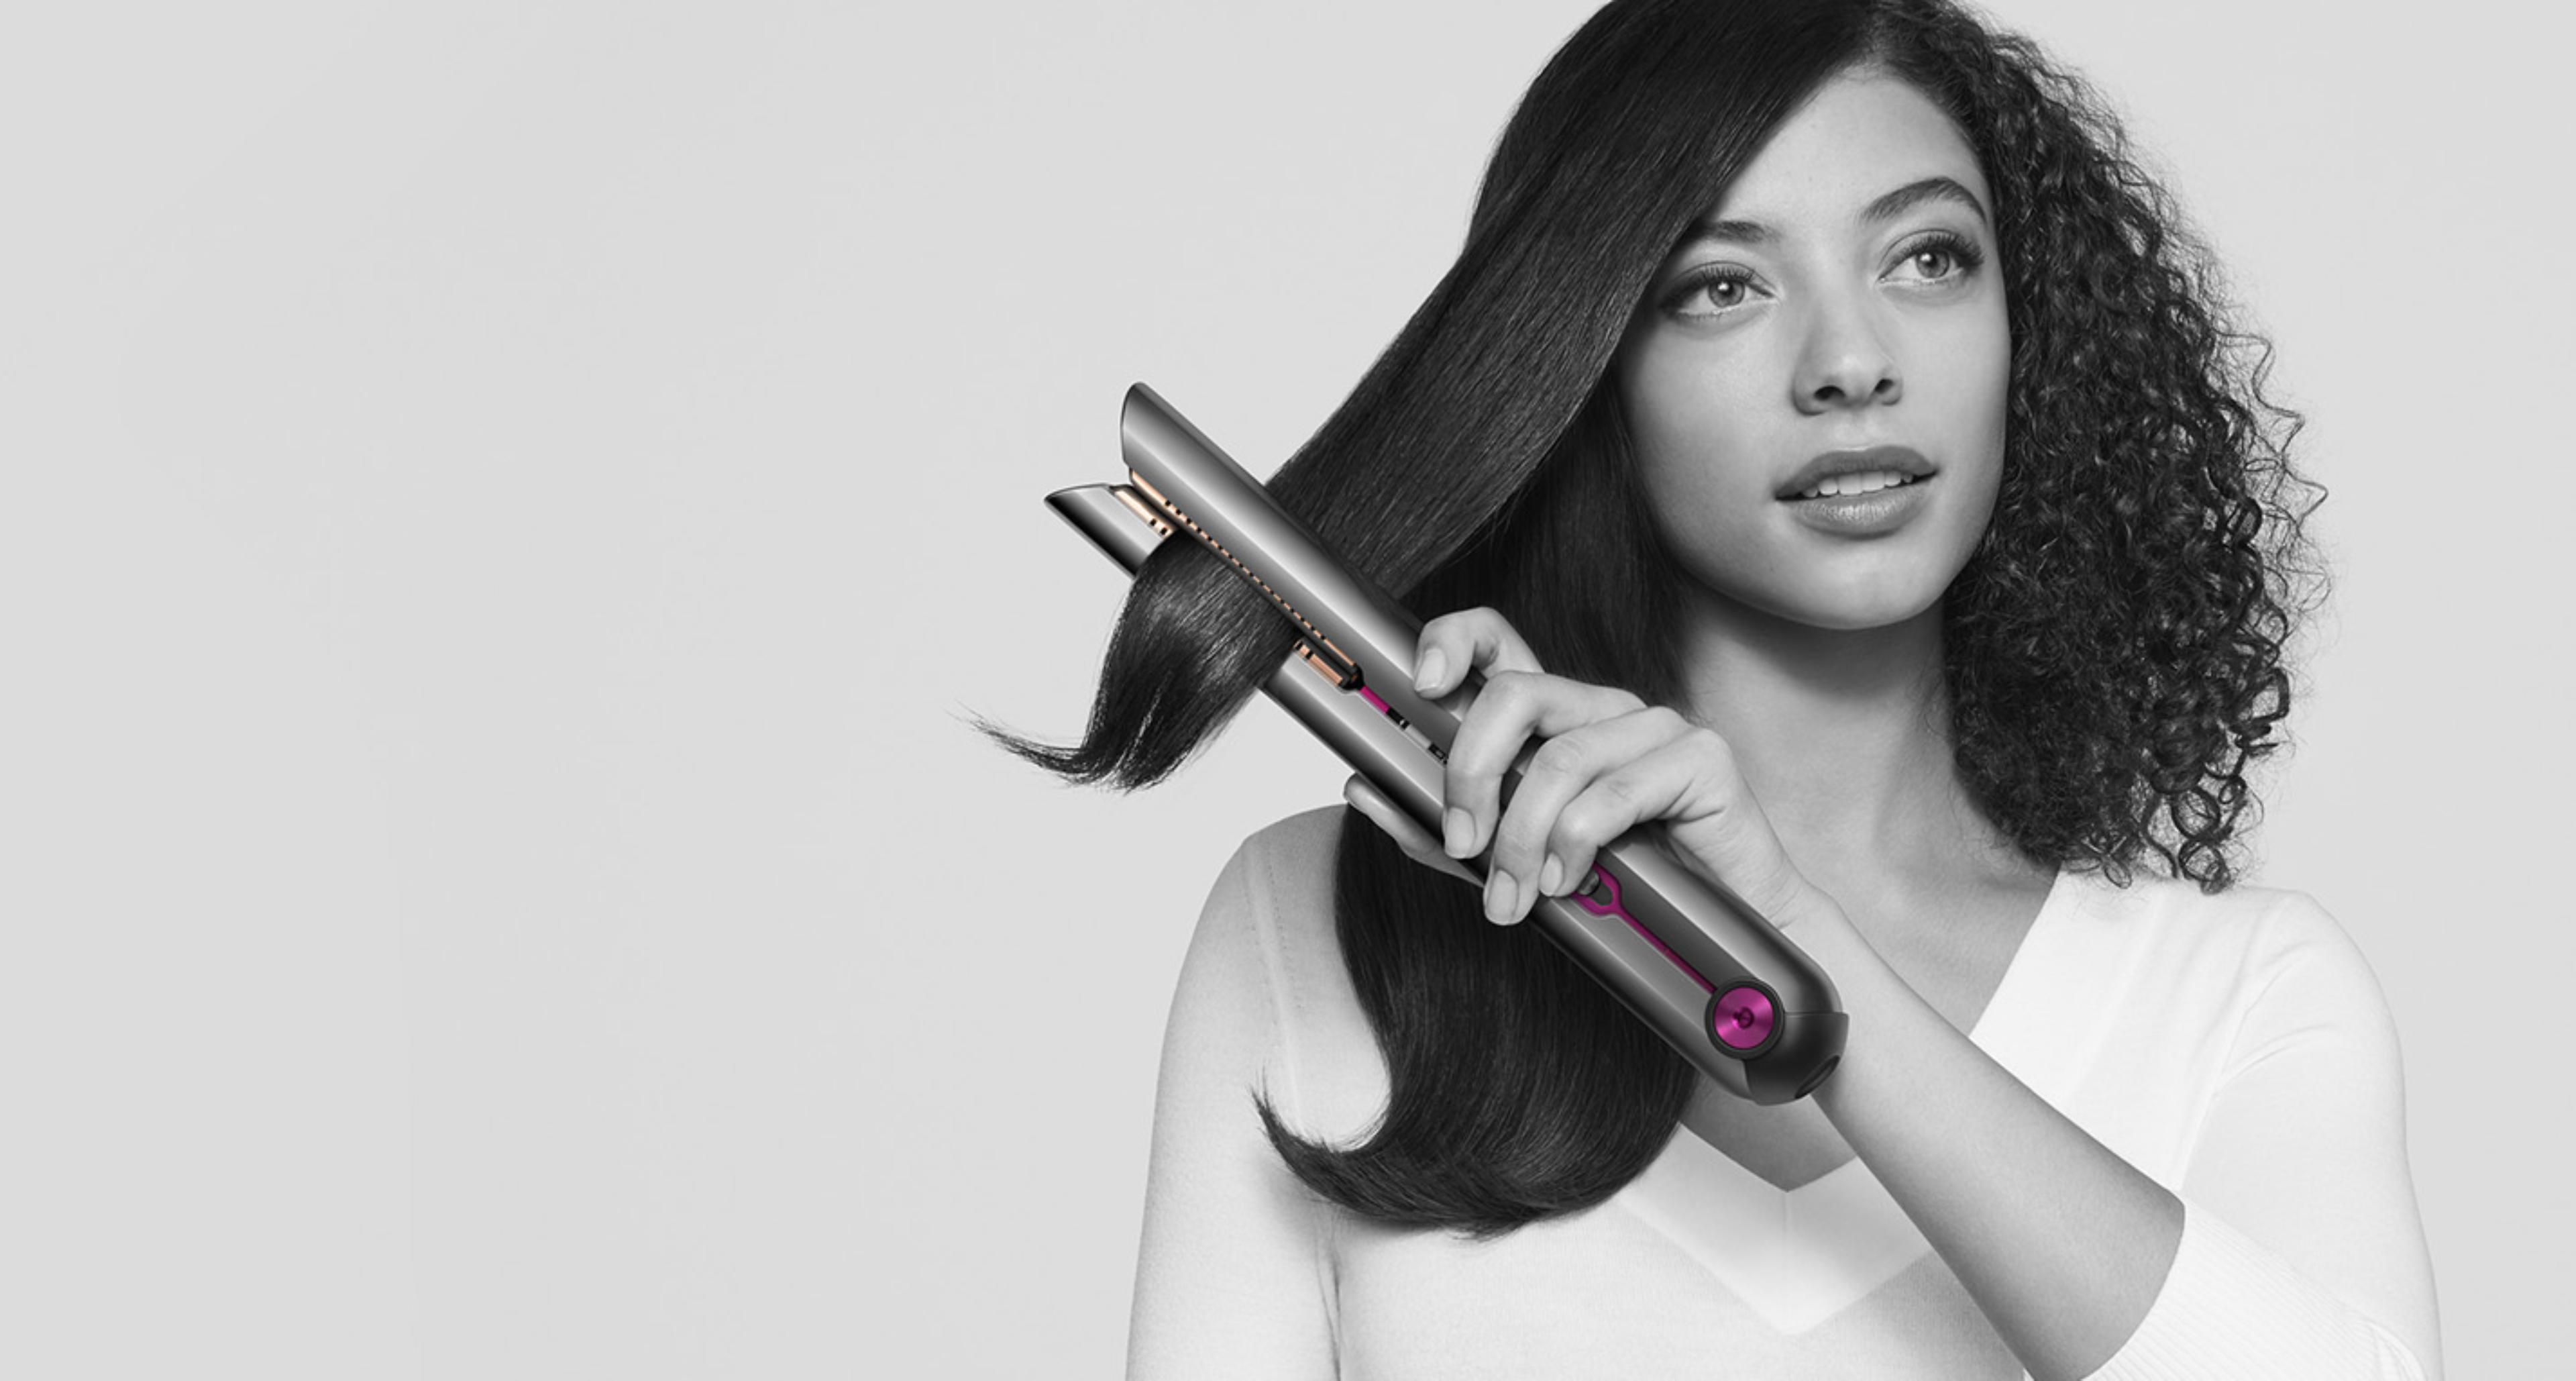 Woman straightening her hair with the Dyson Corrale straightener